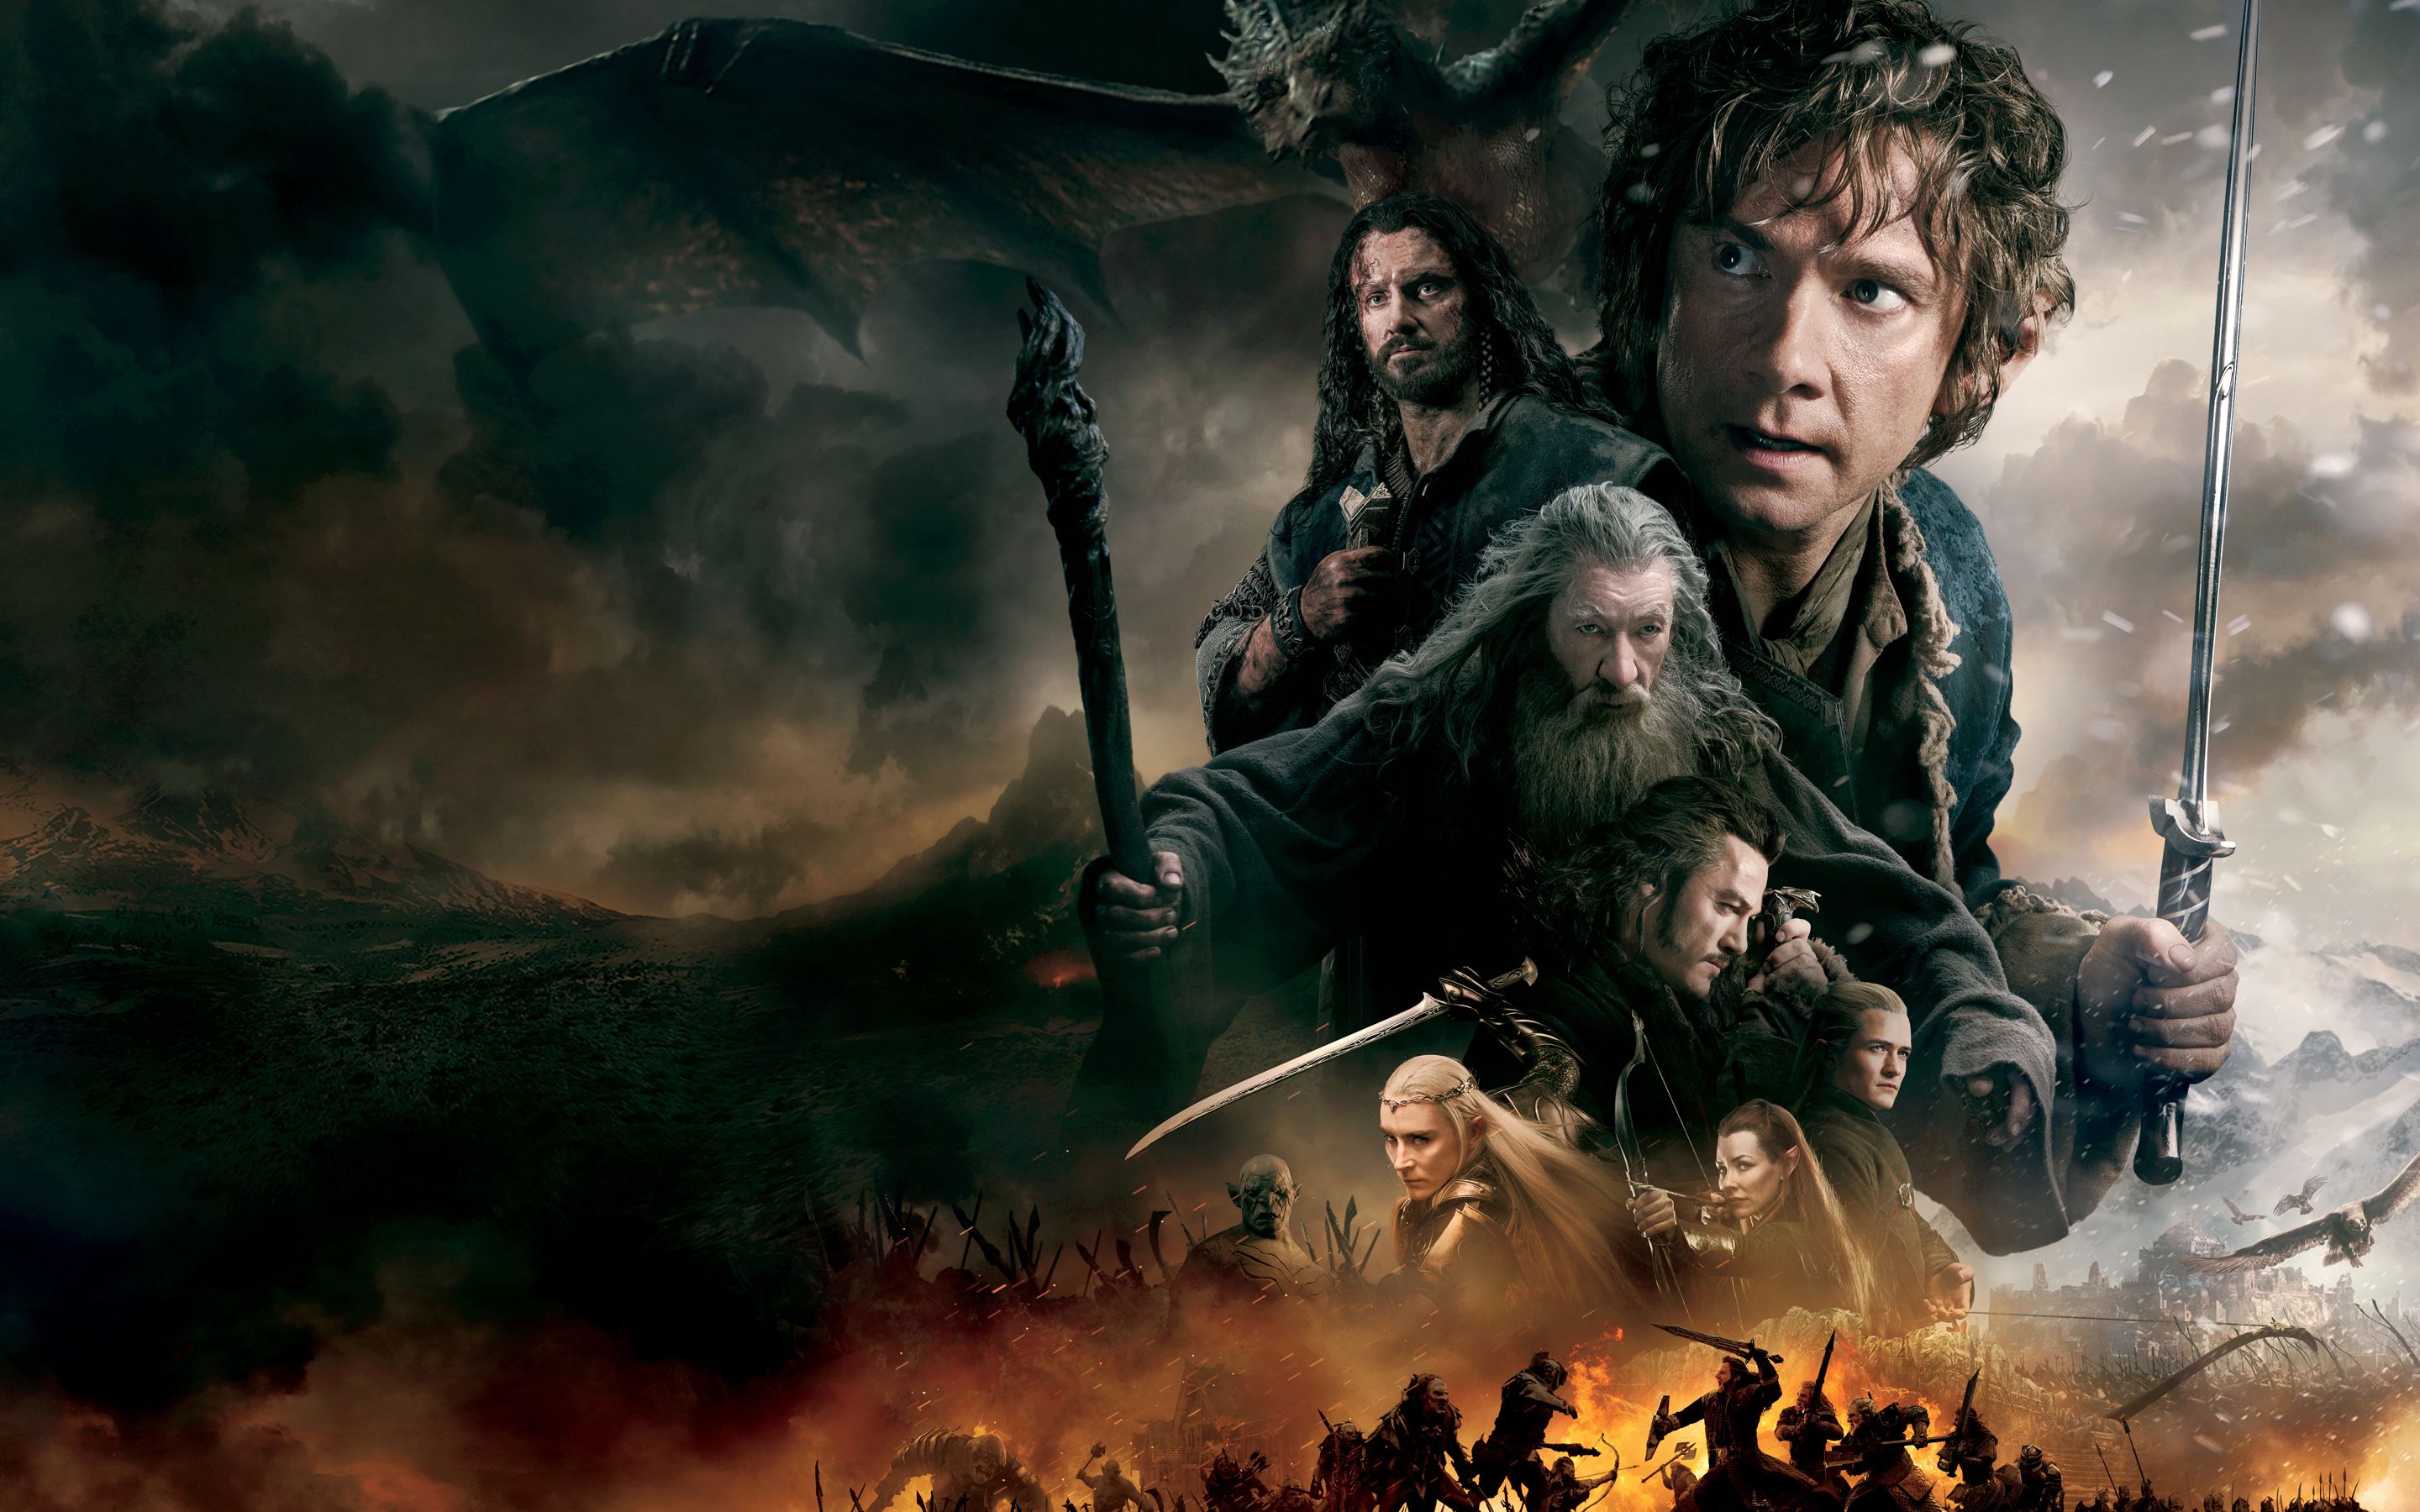 the_hobbit_the_battle_of_the_five_armies_2014-main-review.jpg